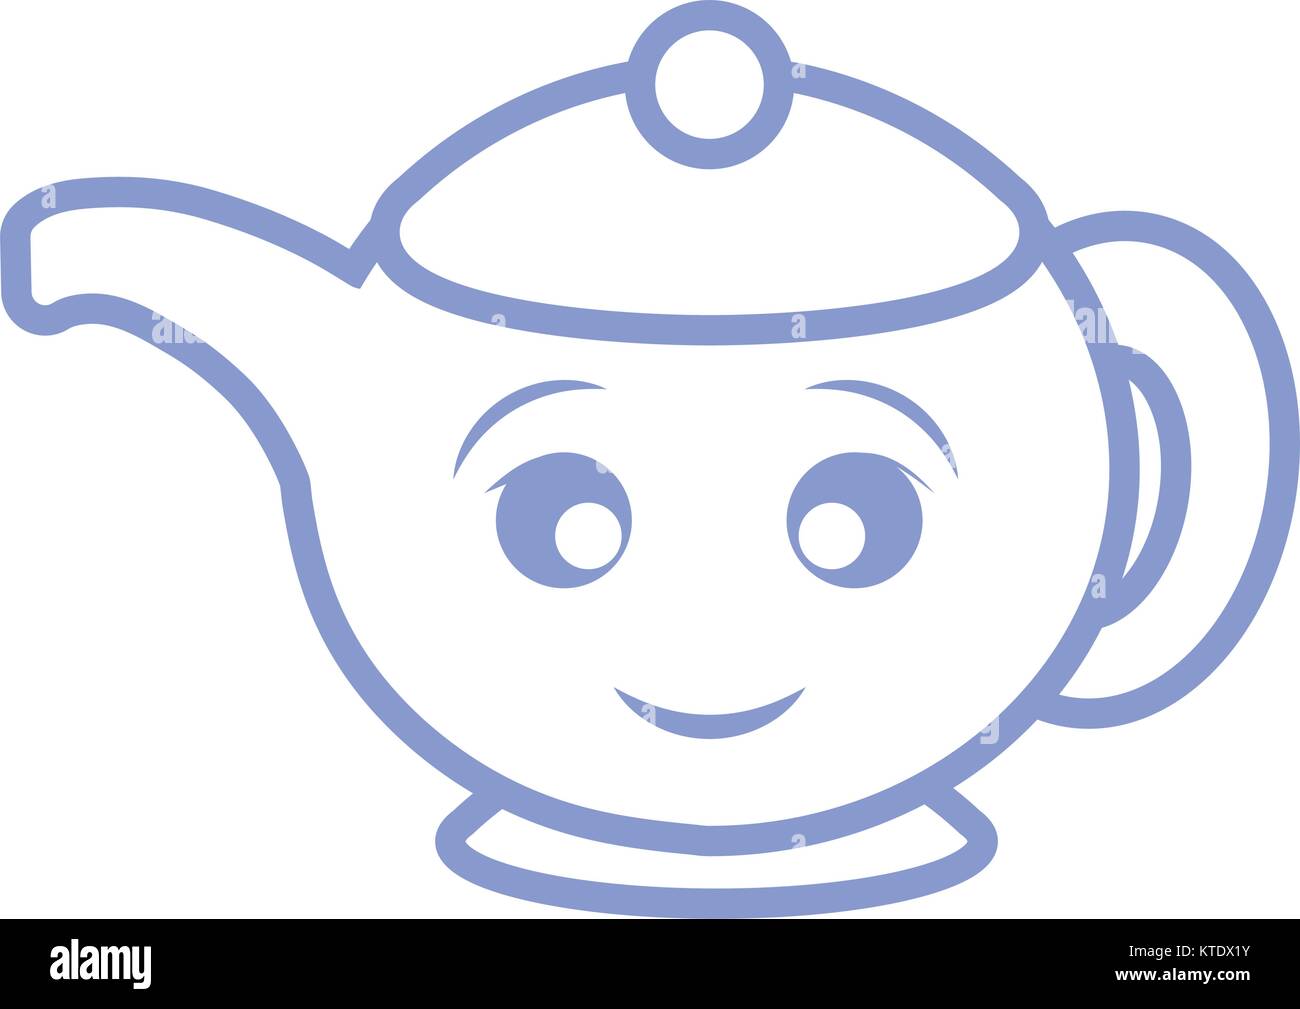 Cute Teapot Kitchenware Cute Cartoon Vector Illustration Royalty Free SVG,  Cliparts, Vectors, and Stock Illustration. Image 84524711.